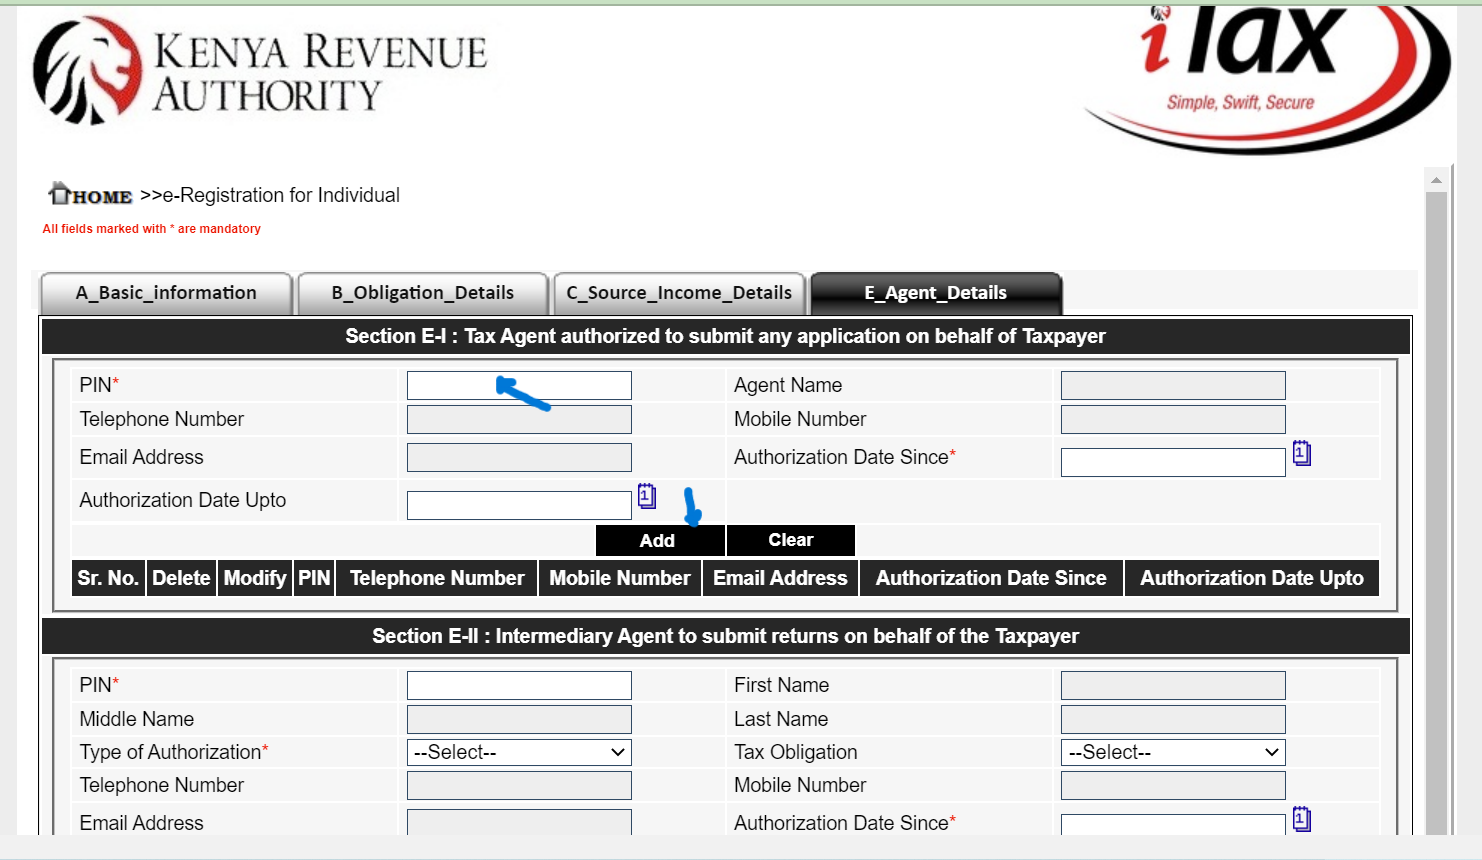 Foreigner (NonResident) KRA Tax PIN Registration in Kenya ANZIANO